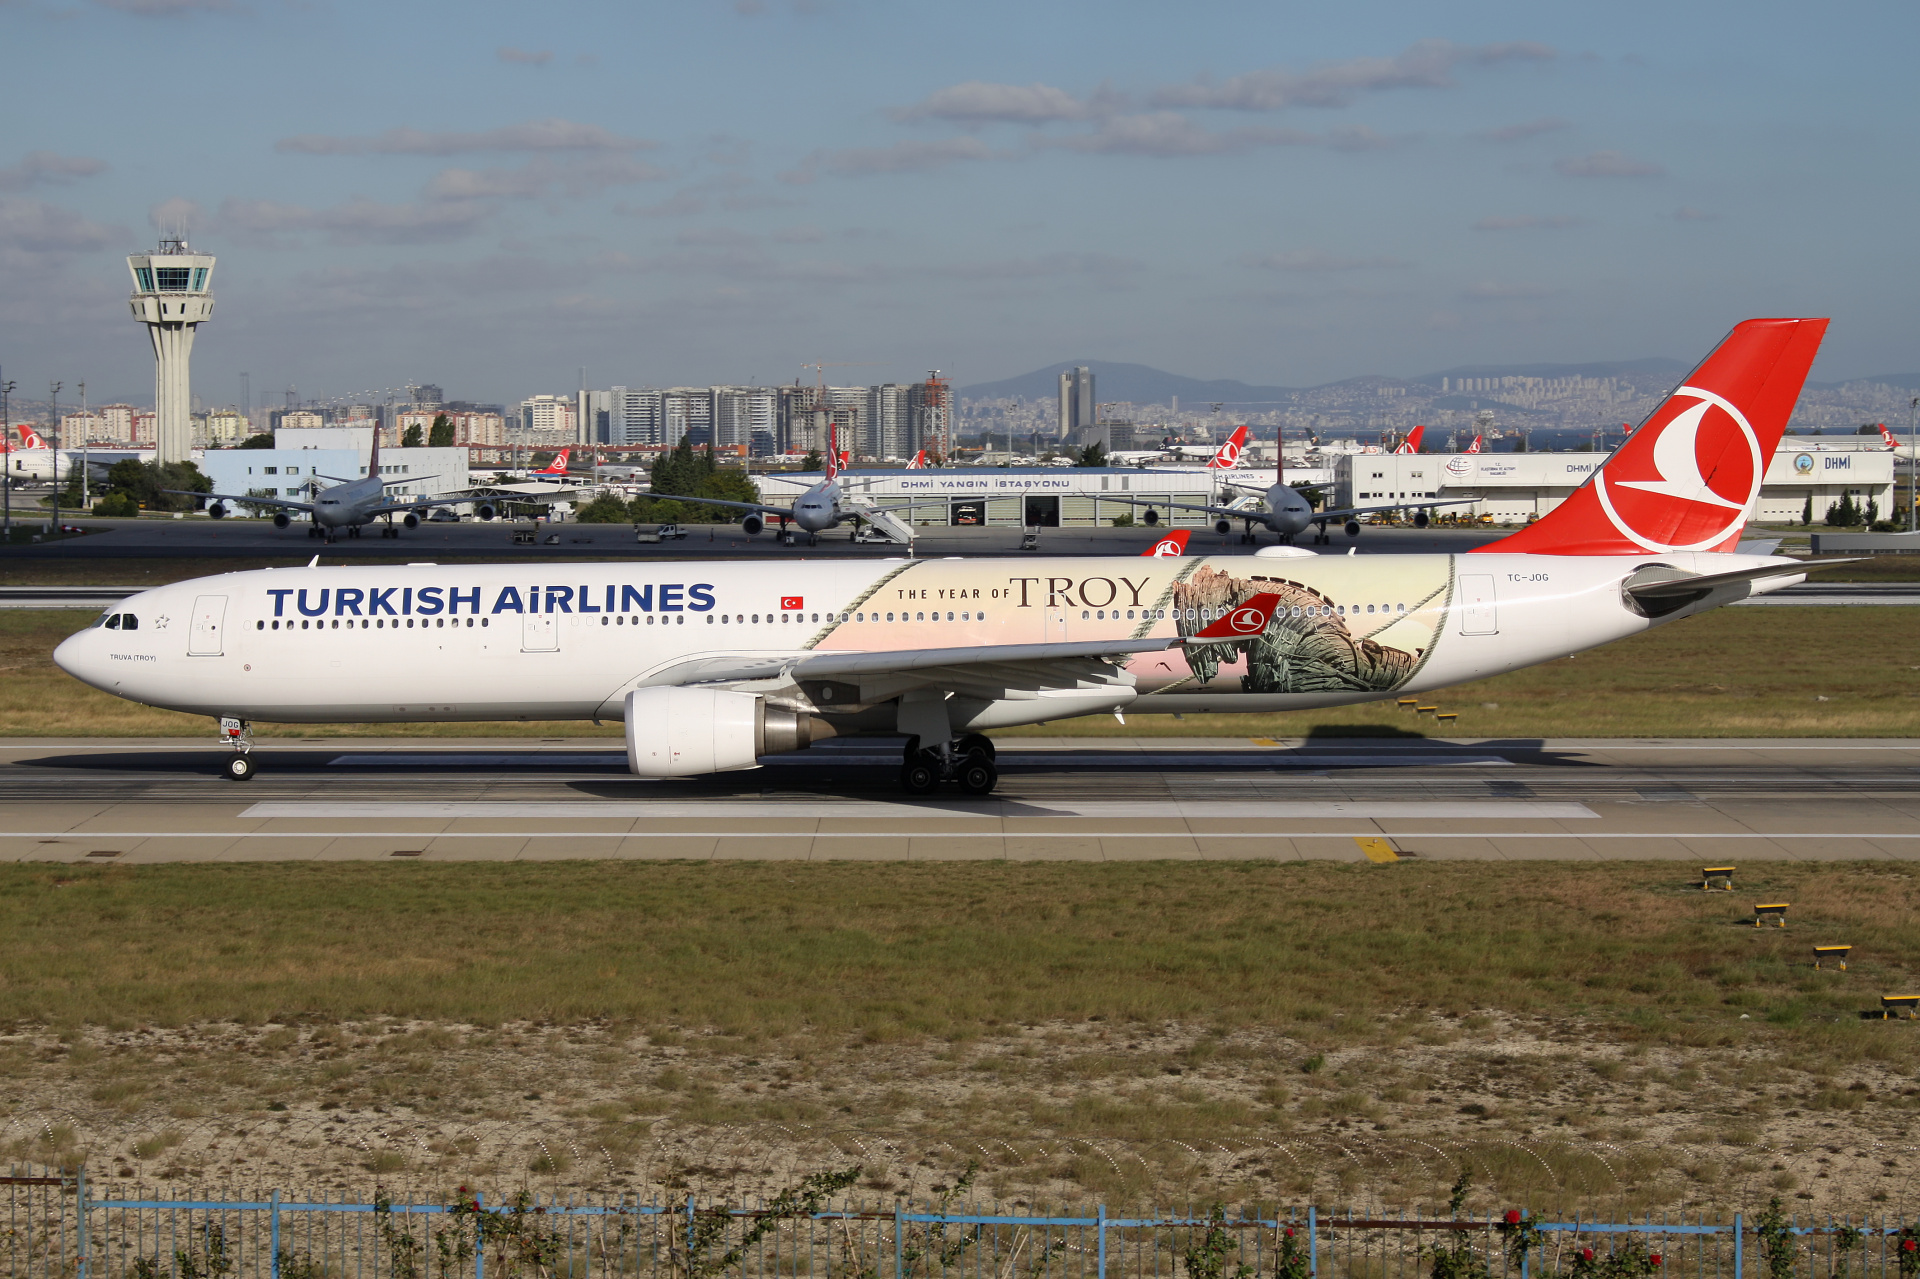 TC-JOG (The Year of Troy livery) (Aircraft » Istanbul Atatürk Airport » Airbus A330-300 » THY Turkish Airlines)